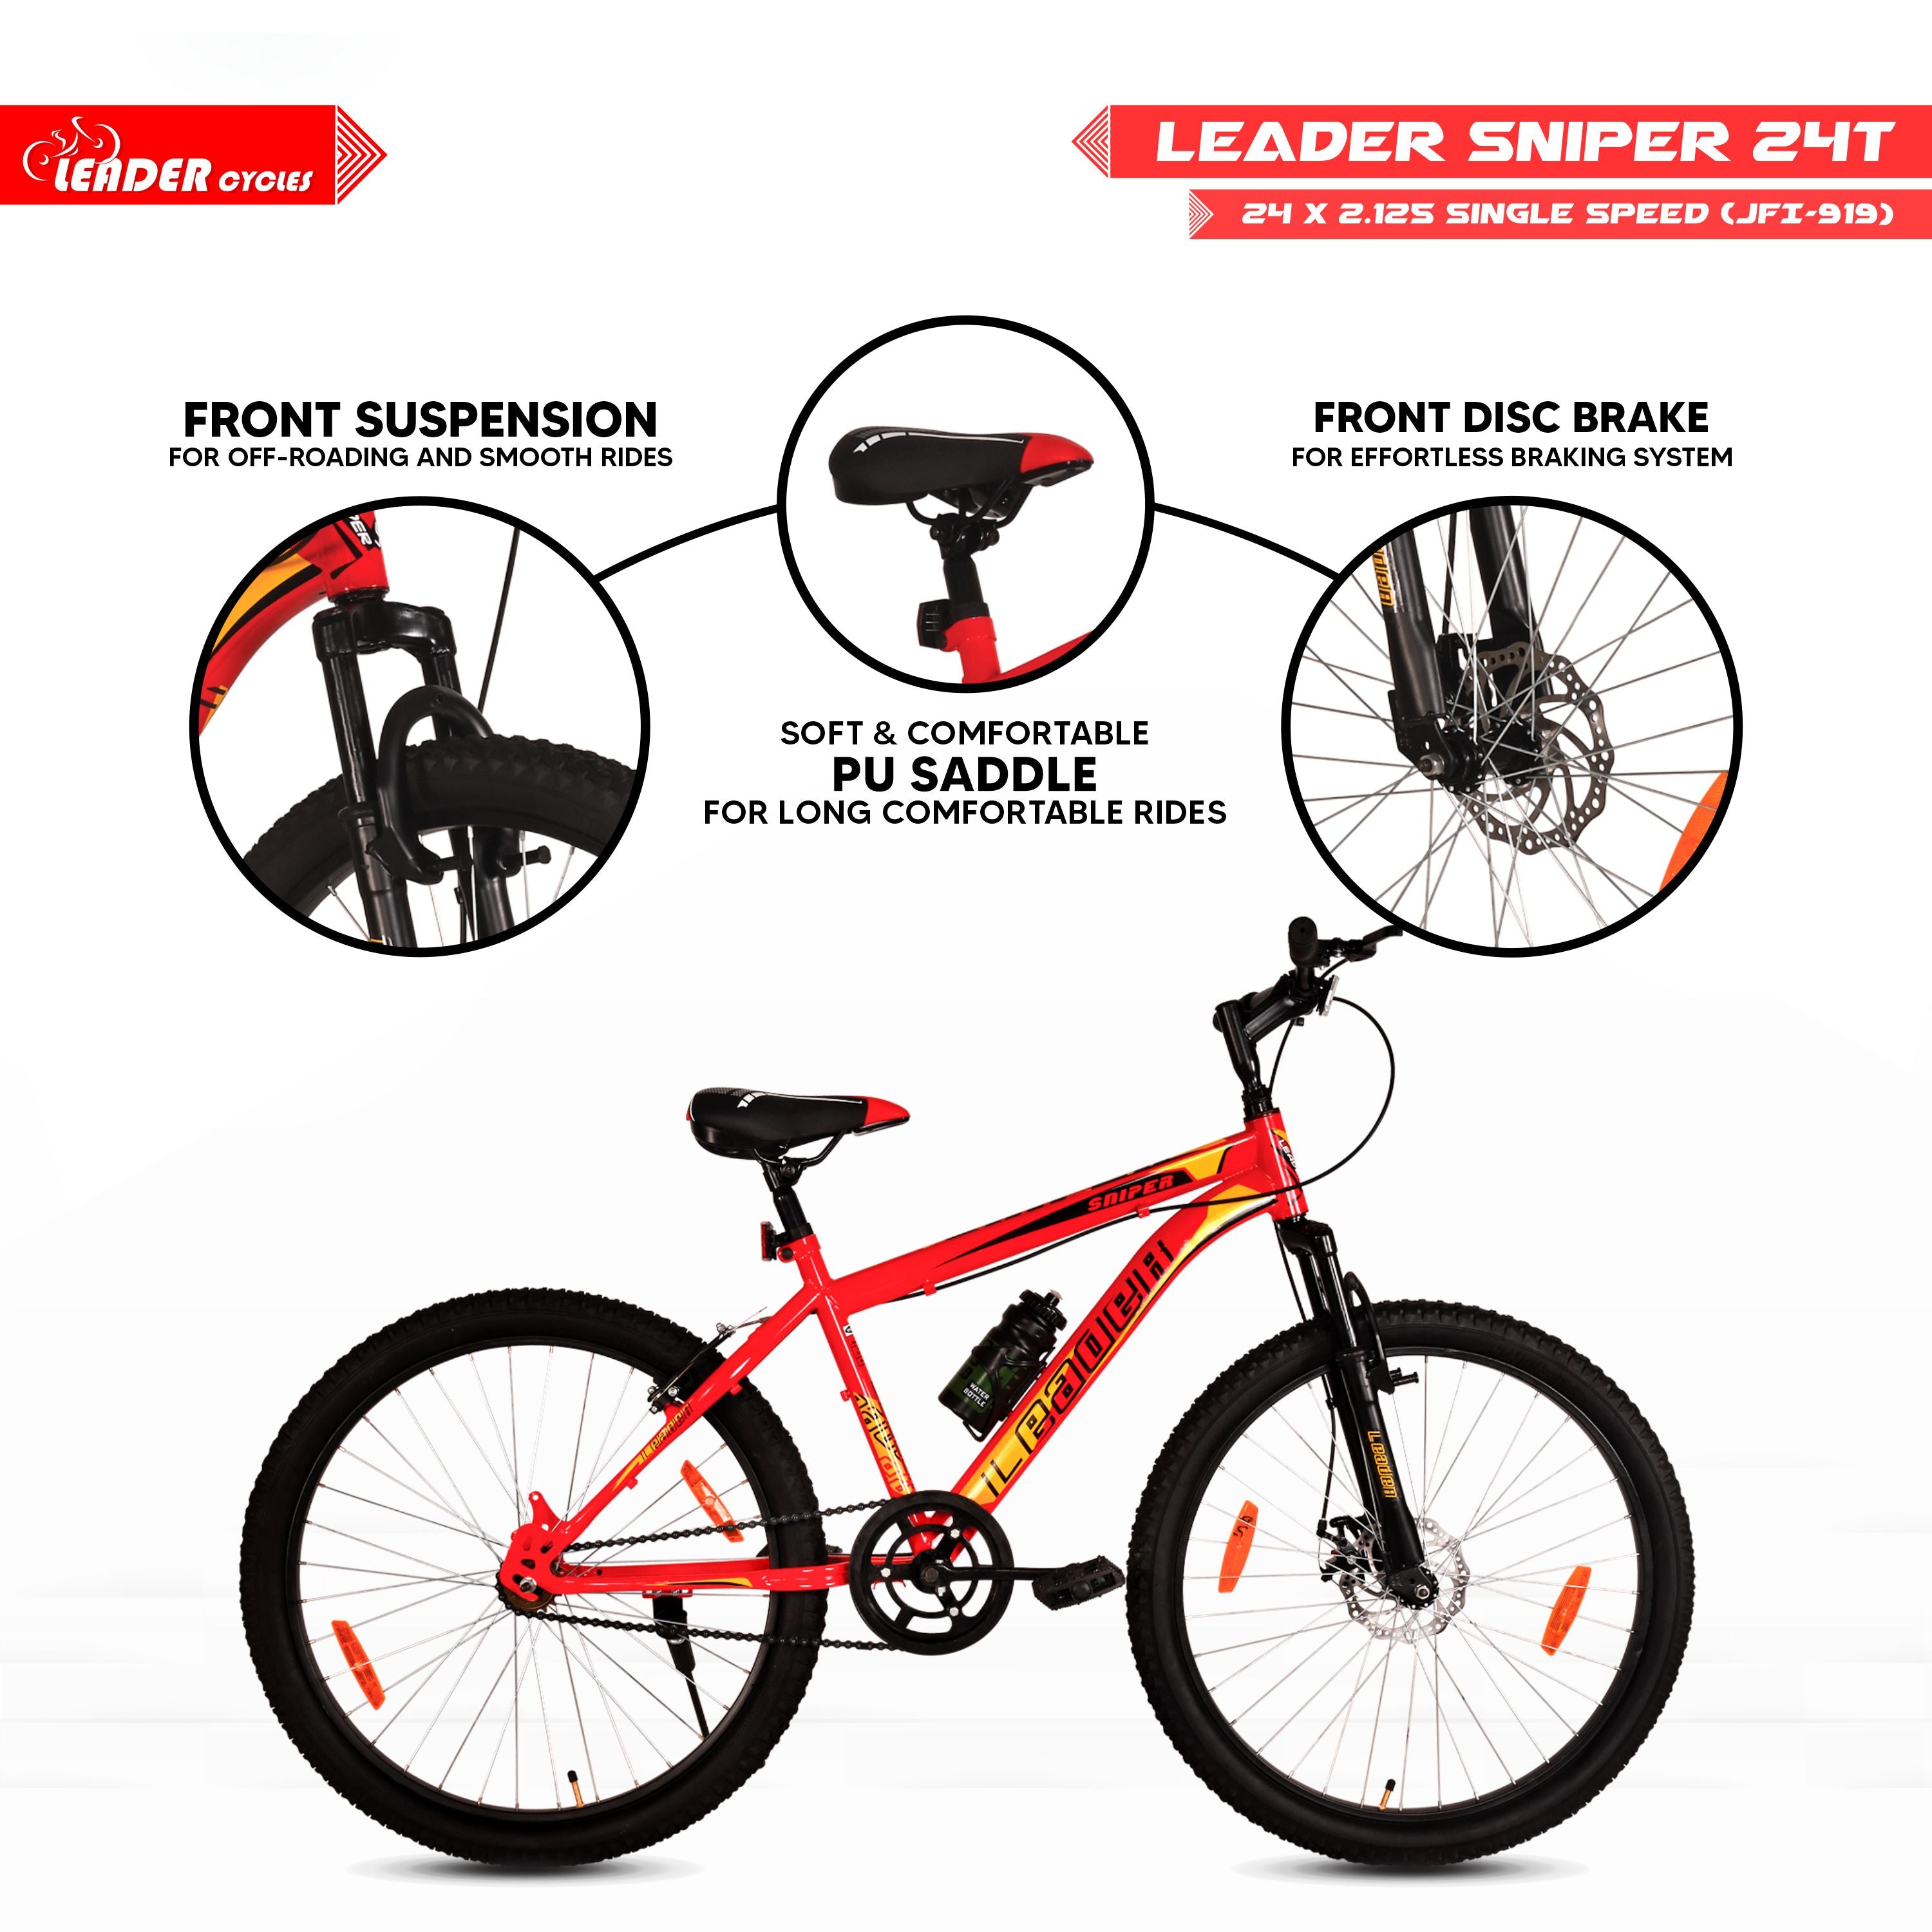 Sniper 24t with Front Suspension & Disc Brake